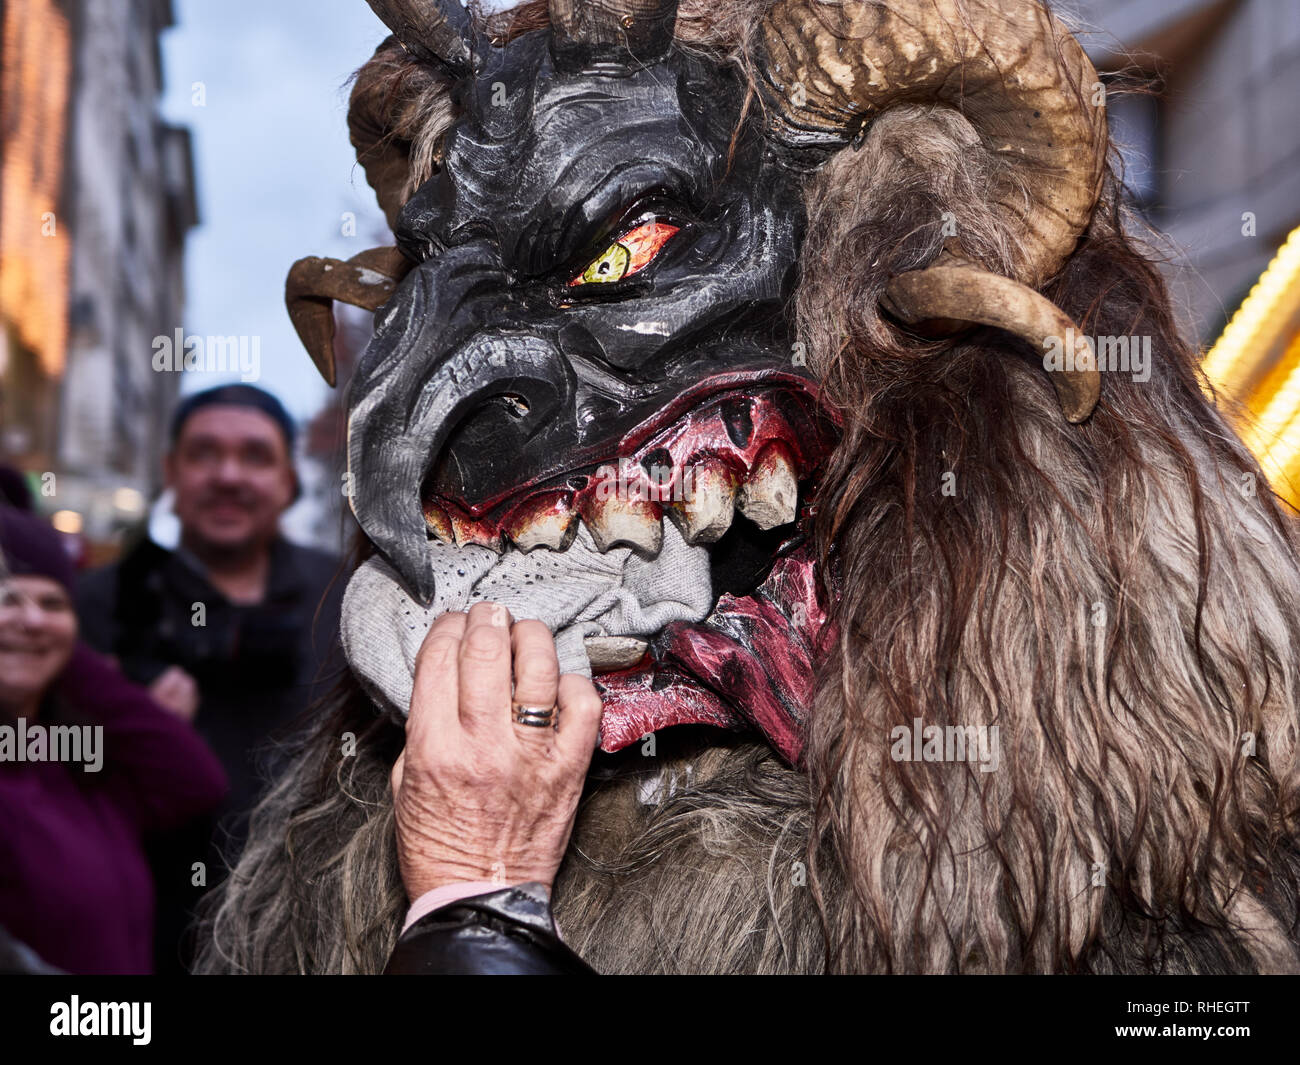 Krampus from Munich December 2018. This a devil masks made from wooden to scare people and espacially children, which from legend they tend to eat. Stock Photo